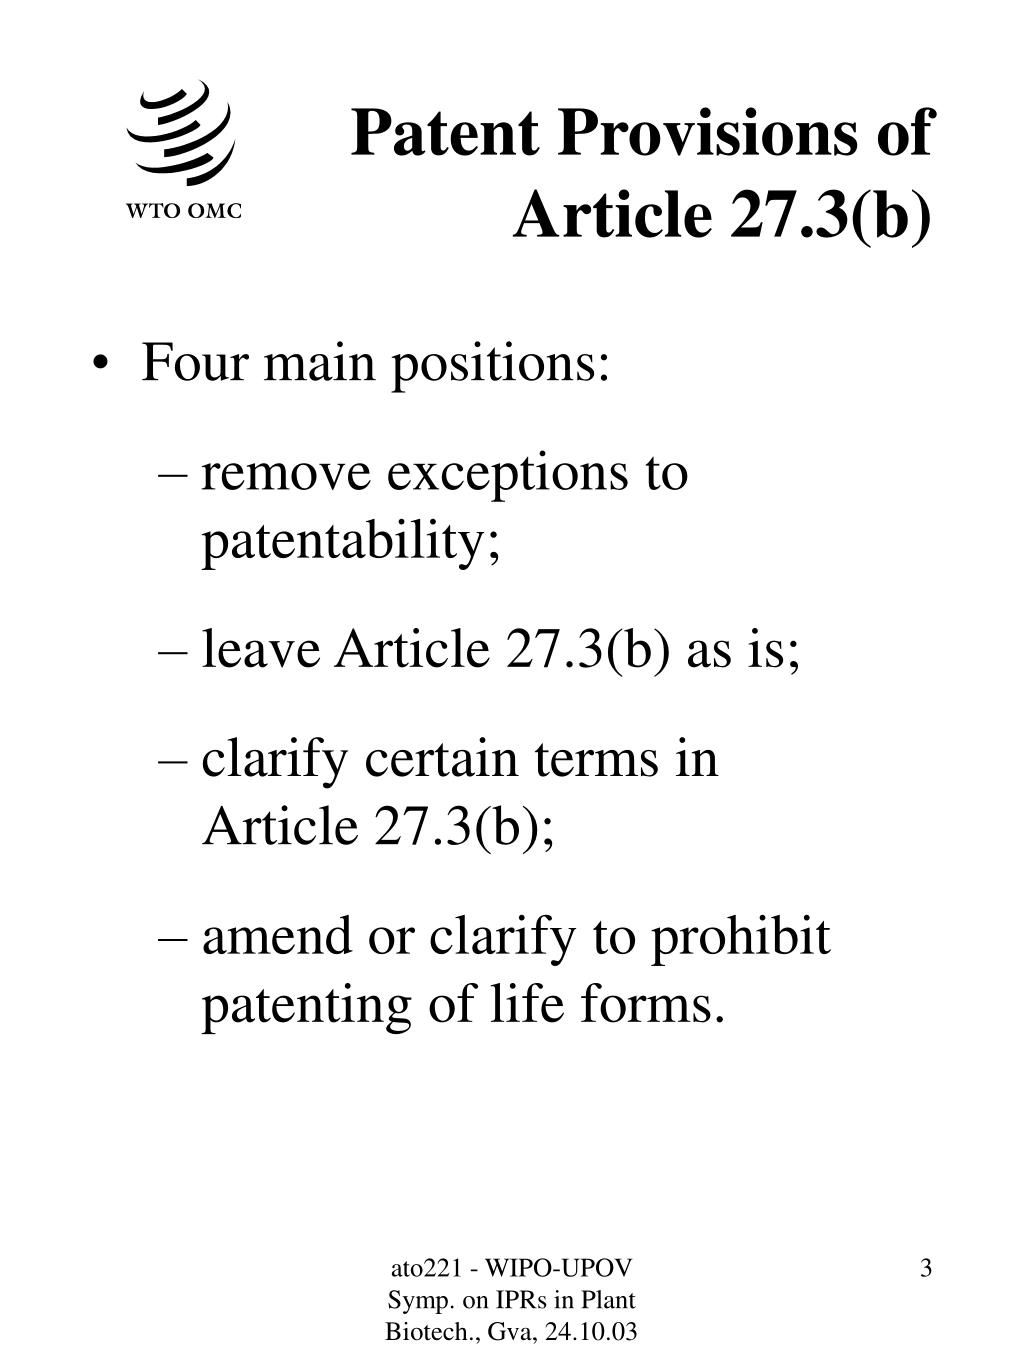 article 27 (3)(b) of trips agreement